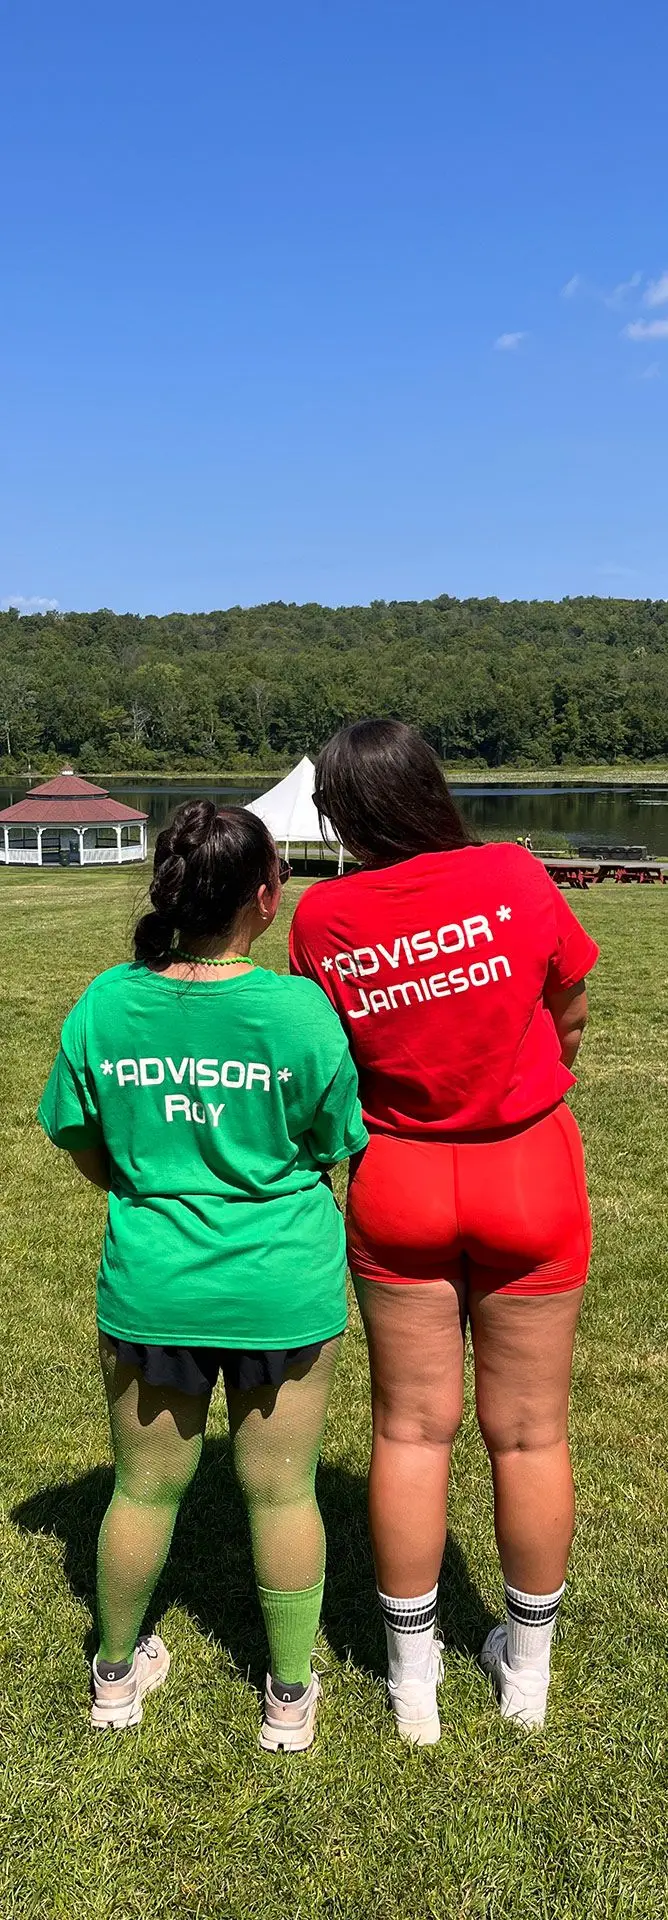 Two girls, one wearing red shorts and tshirt and one wearing green shorts and tshirt, facing away from camera on grass with lake and blue sky in the background